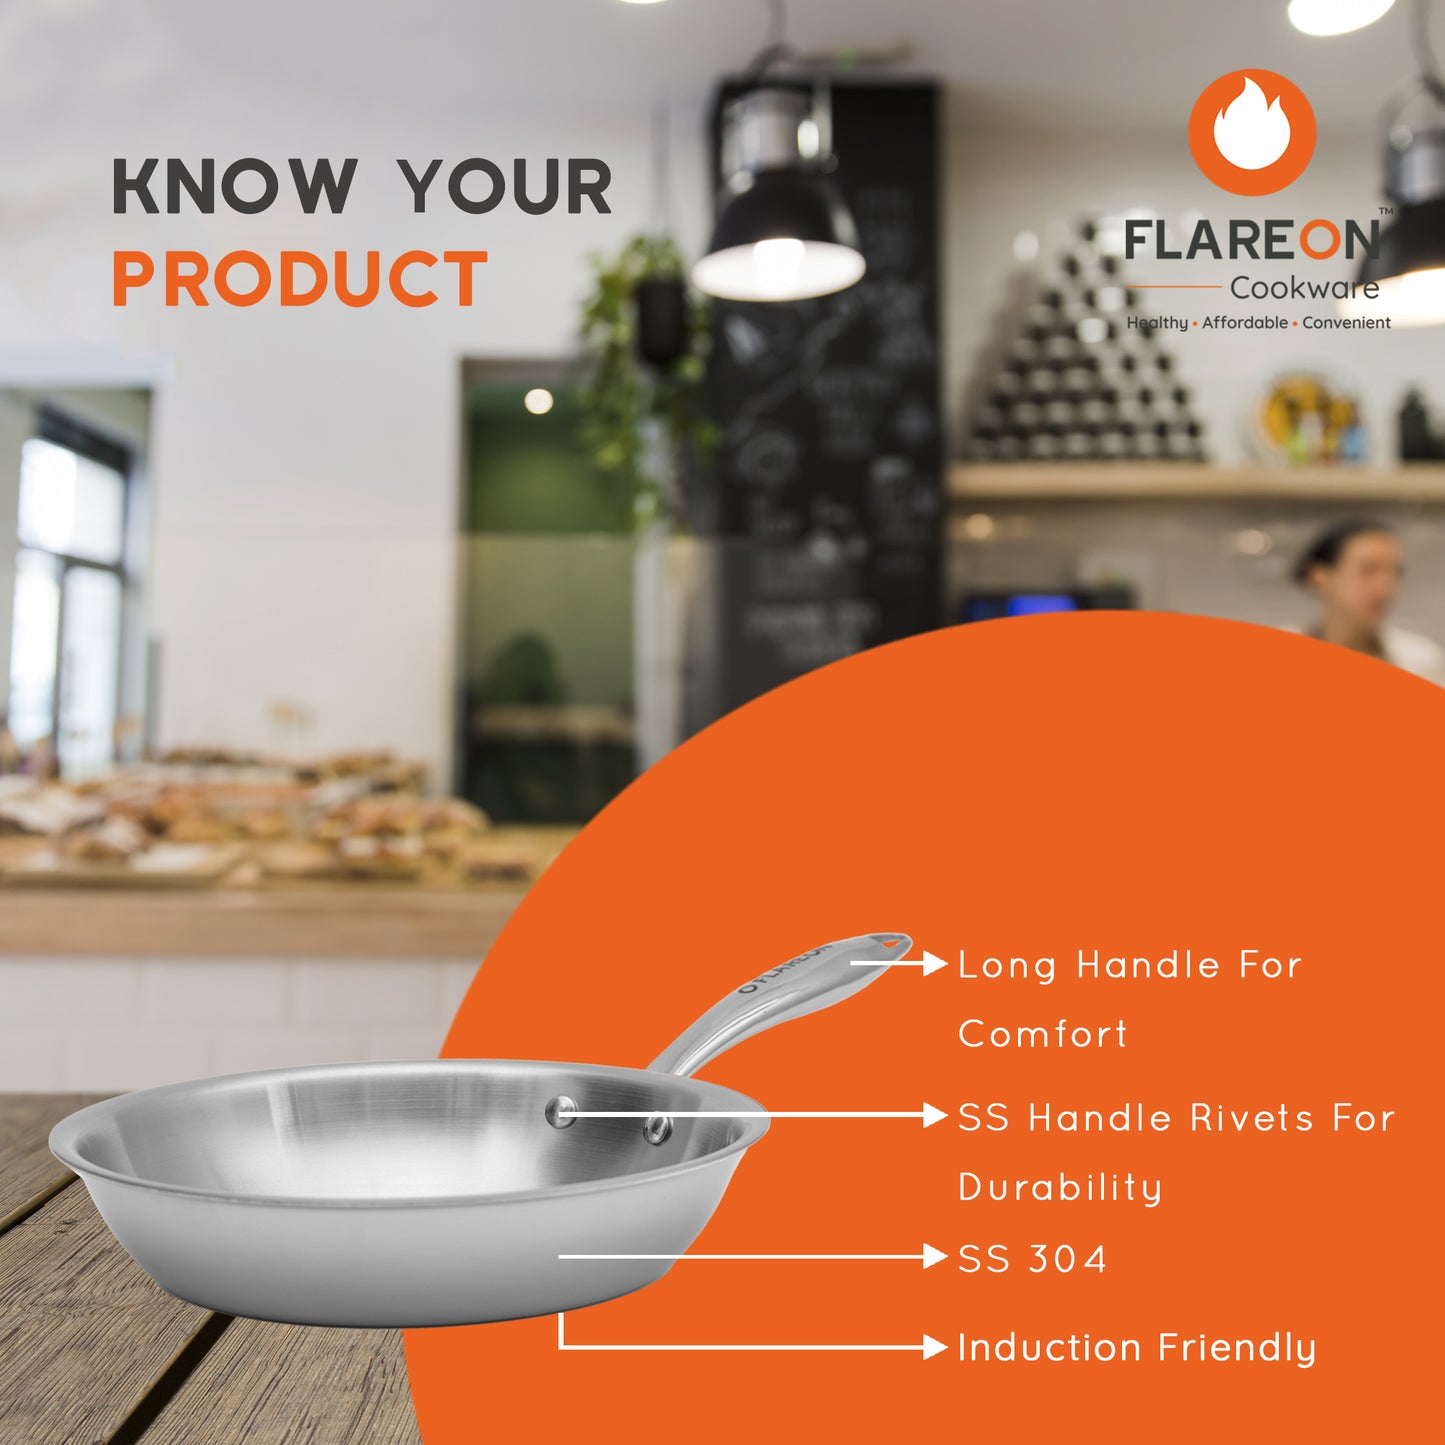 FlareOn's TriPly Stainless Steel Fry Pan 22 Cm- Know Your Product